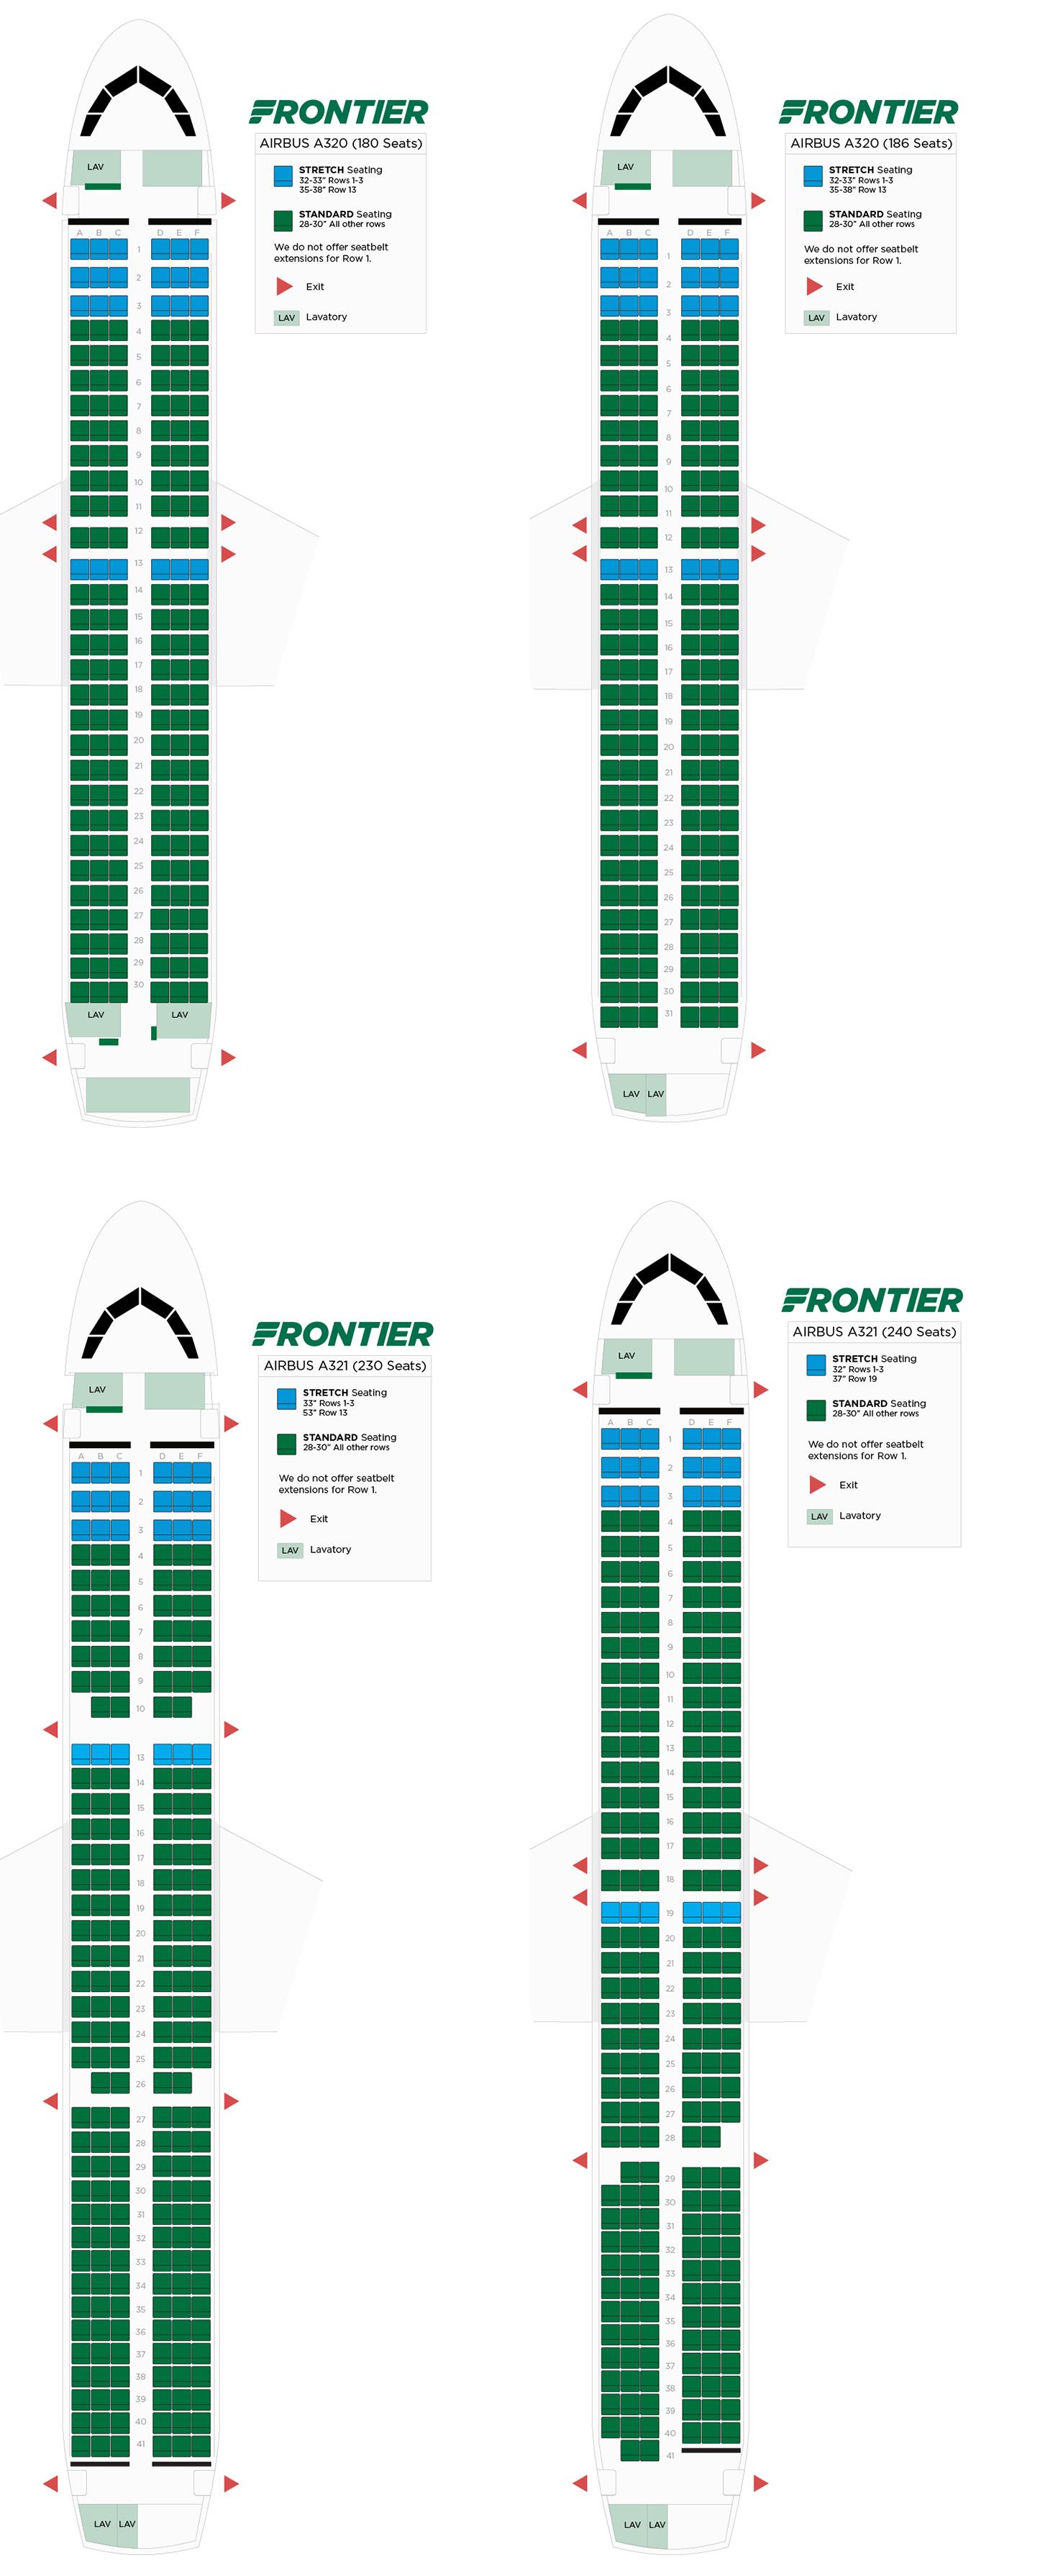 seat assignments frontier airlines